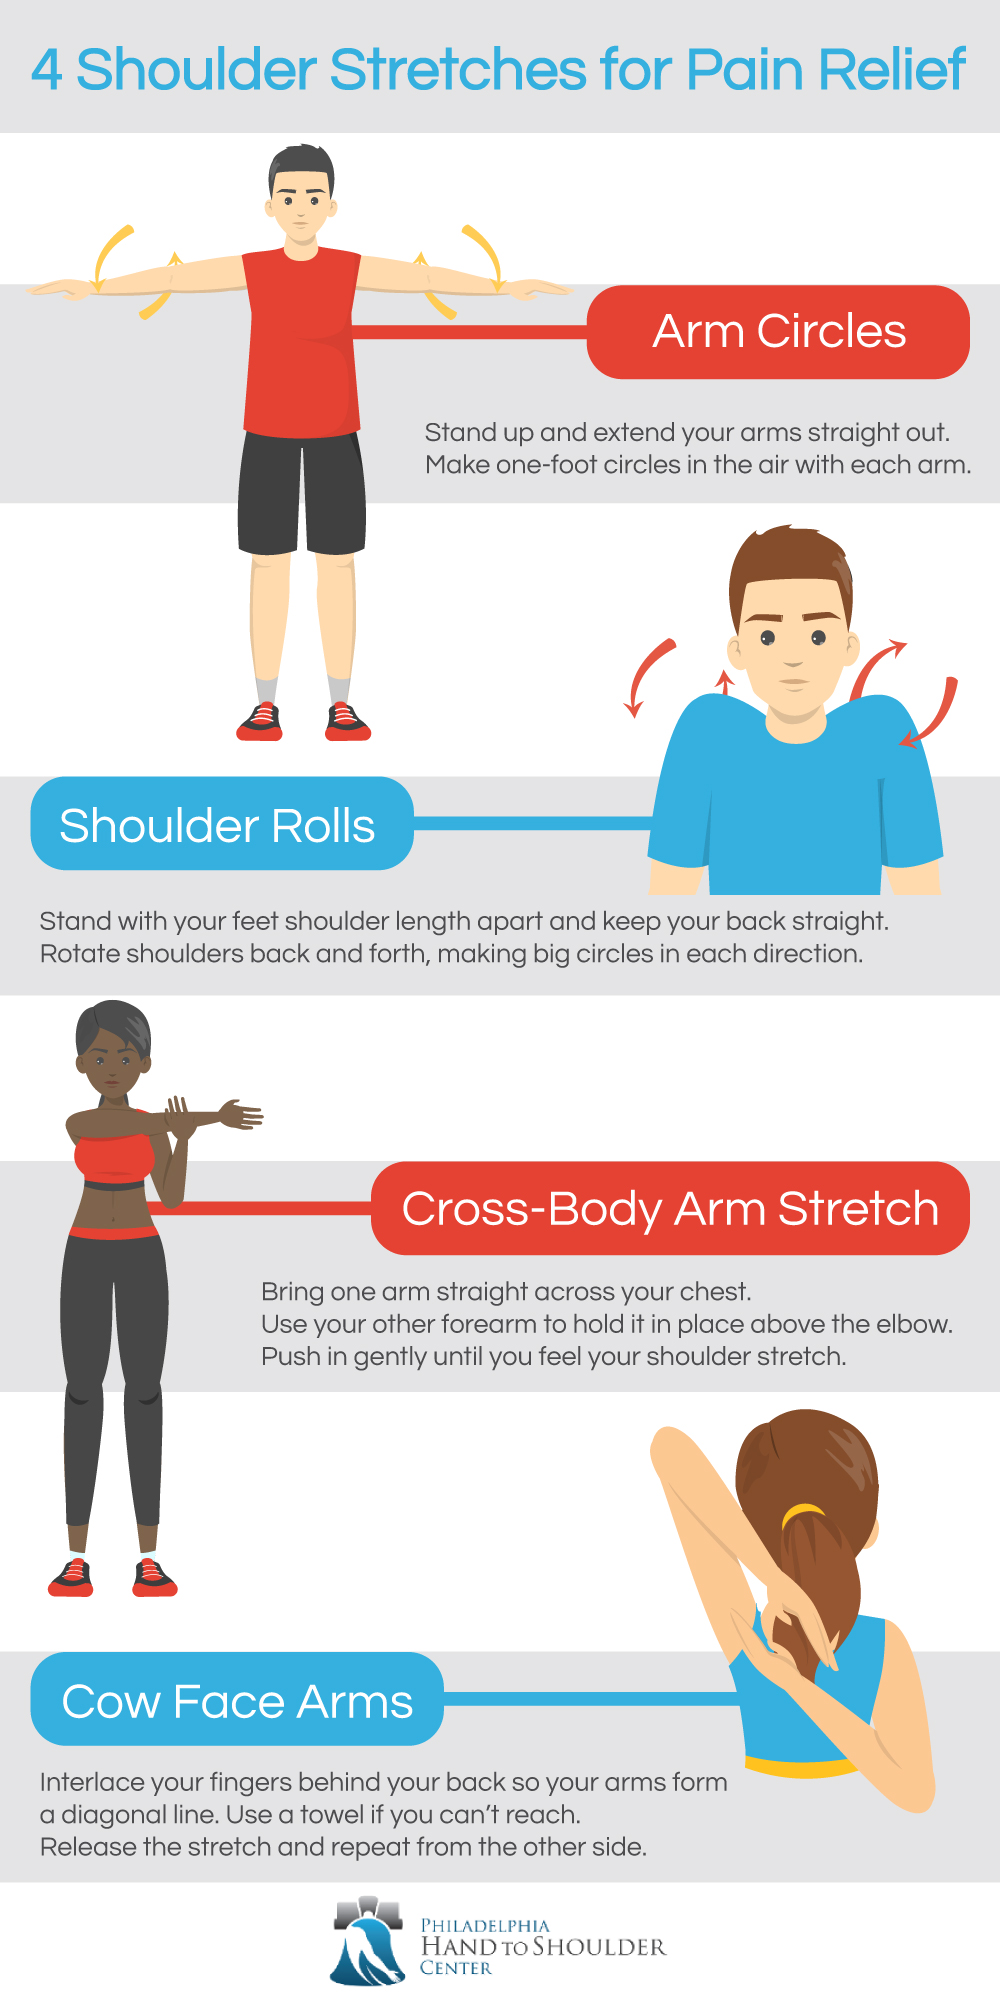 Shoulder Pain: Common Causes and How To Treat It - Philadelphia Hand to ...